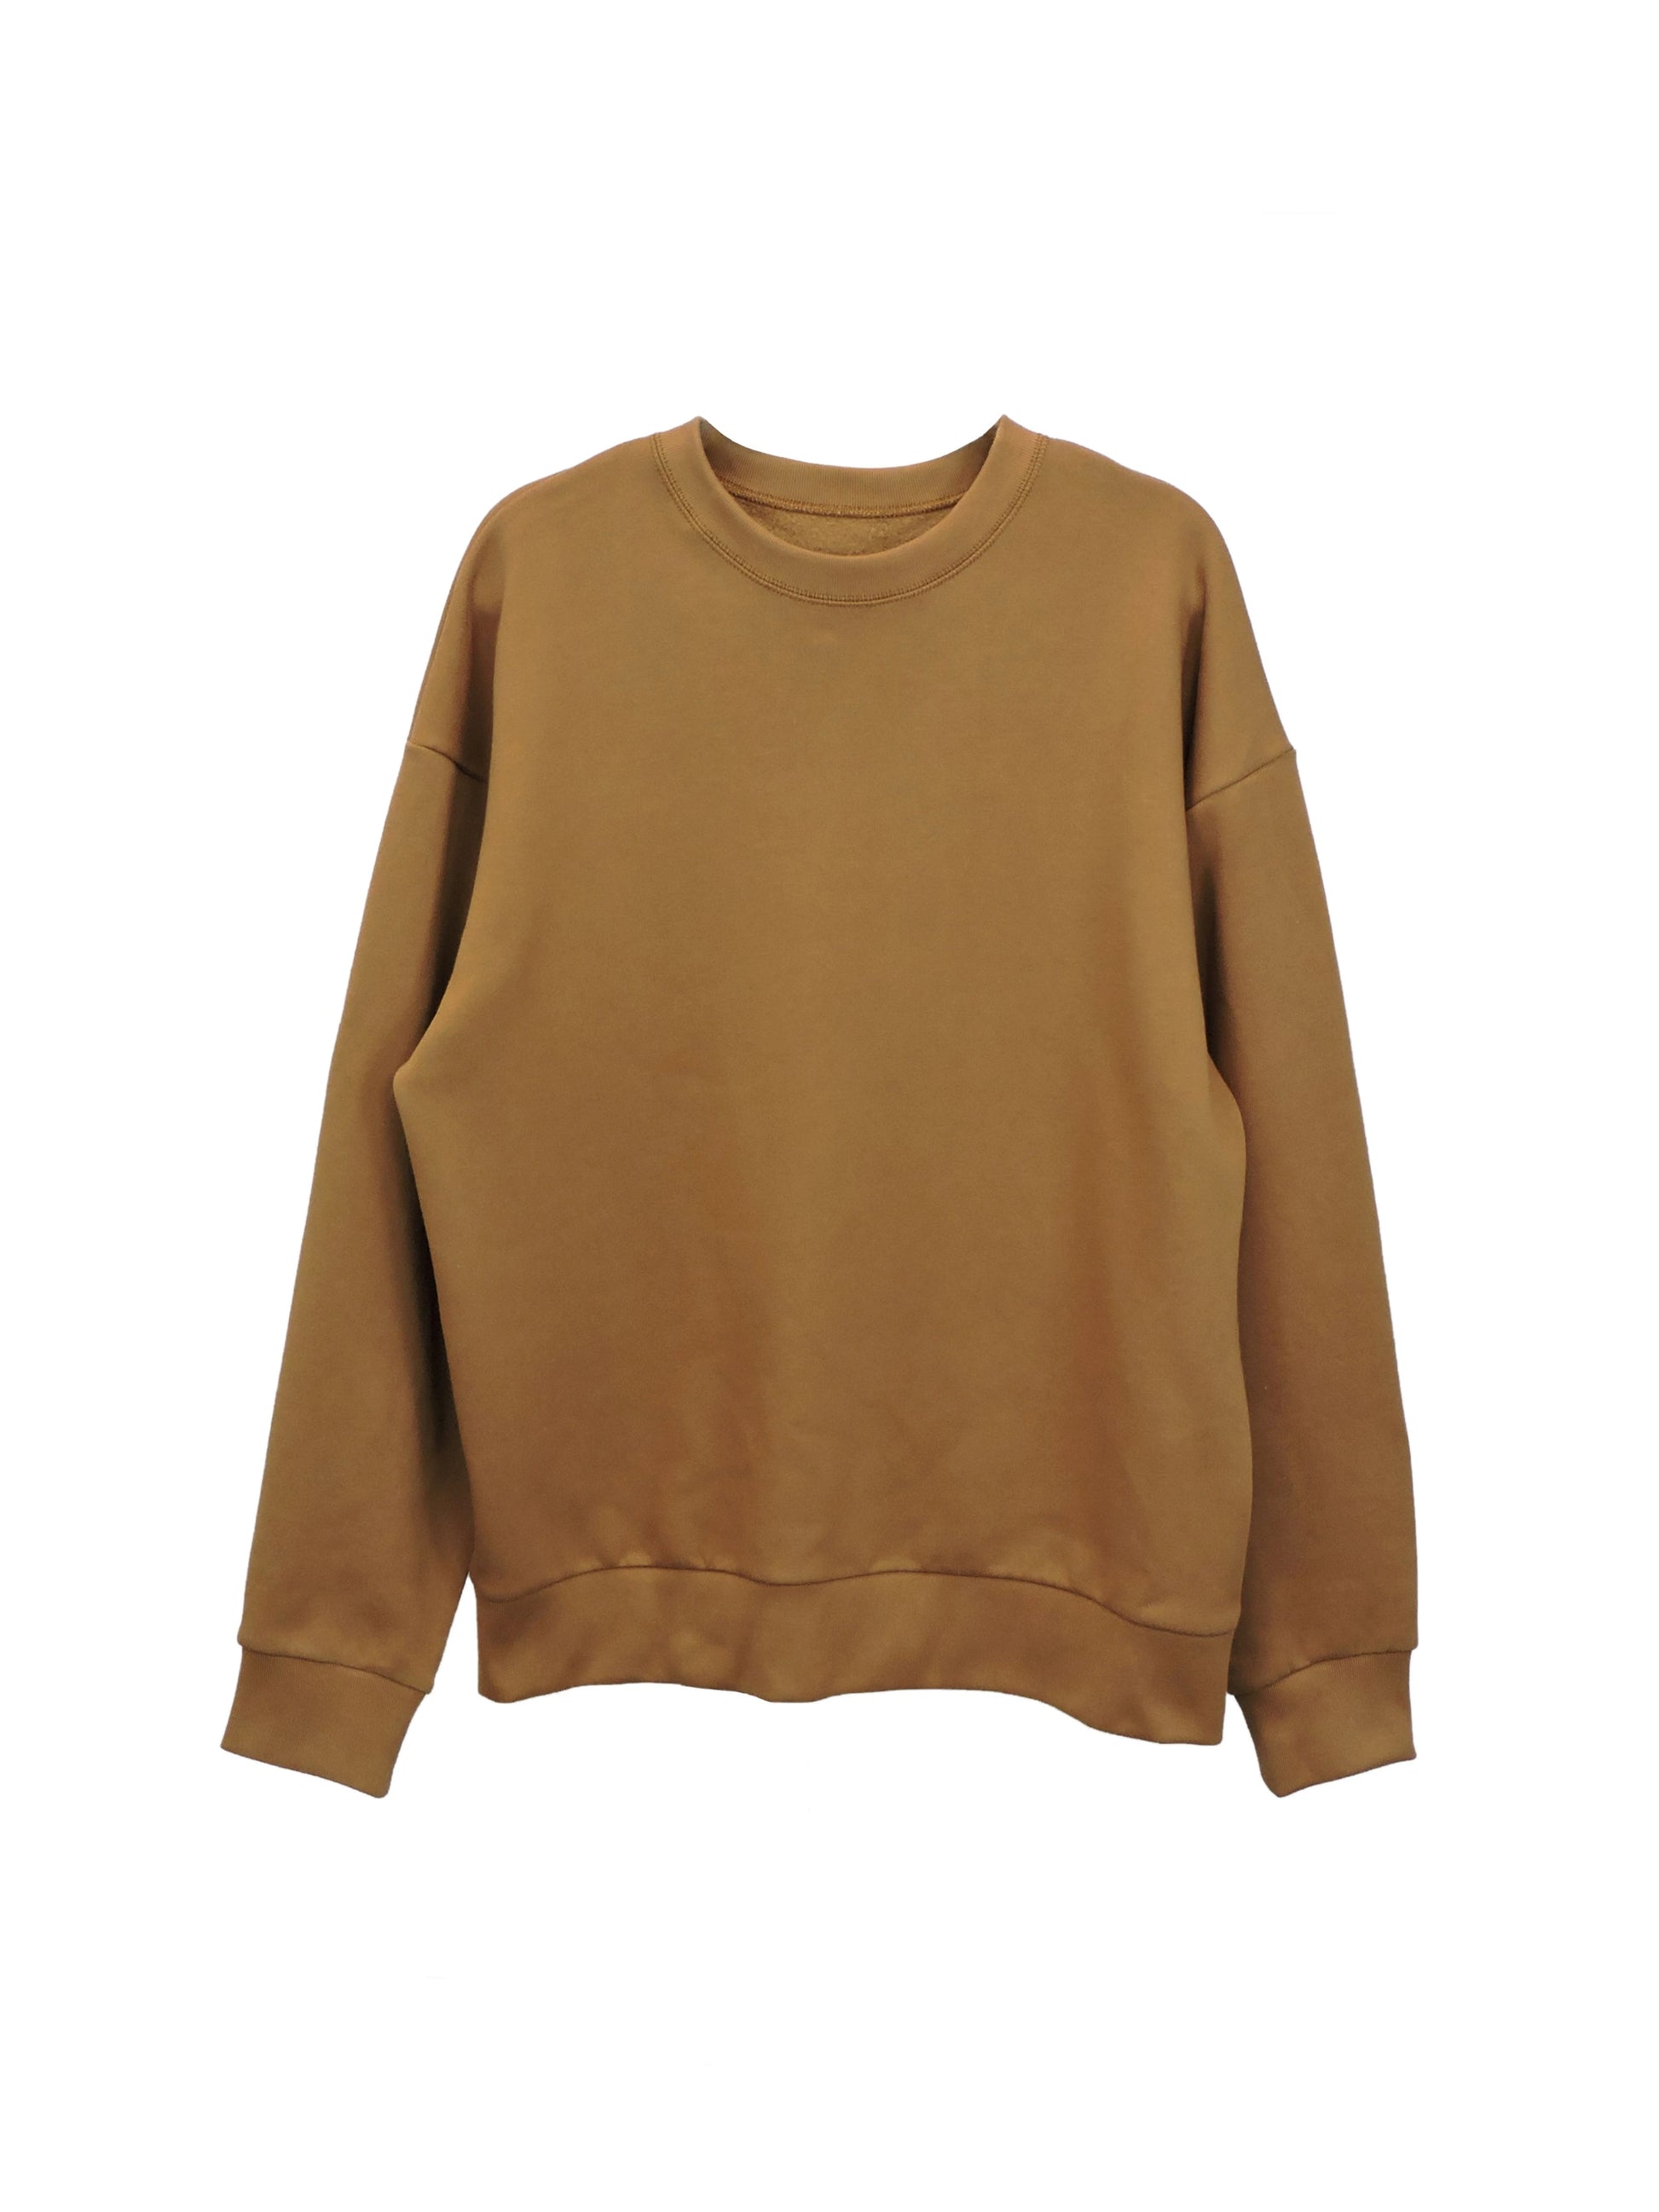 Groundhog Brown Crewneck with Fitted Cuffs and Waistband